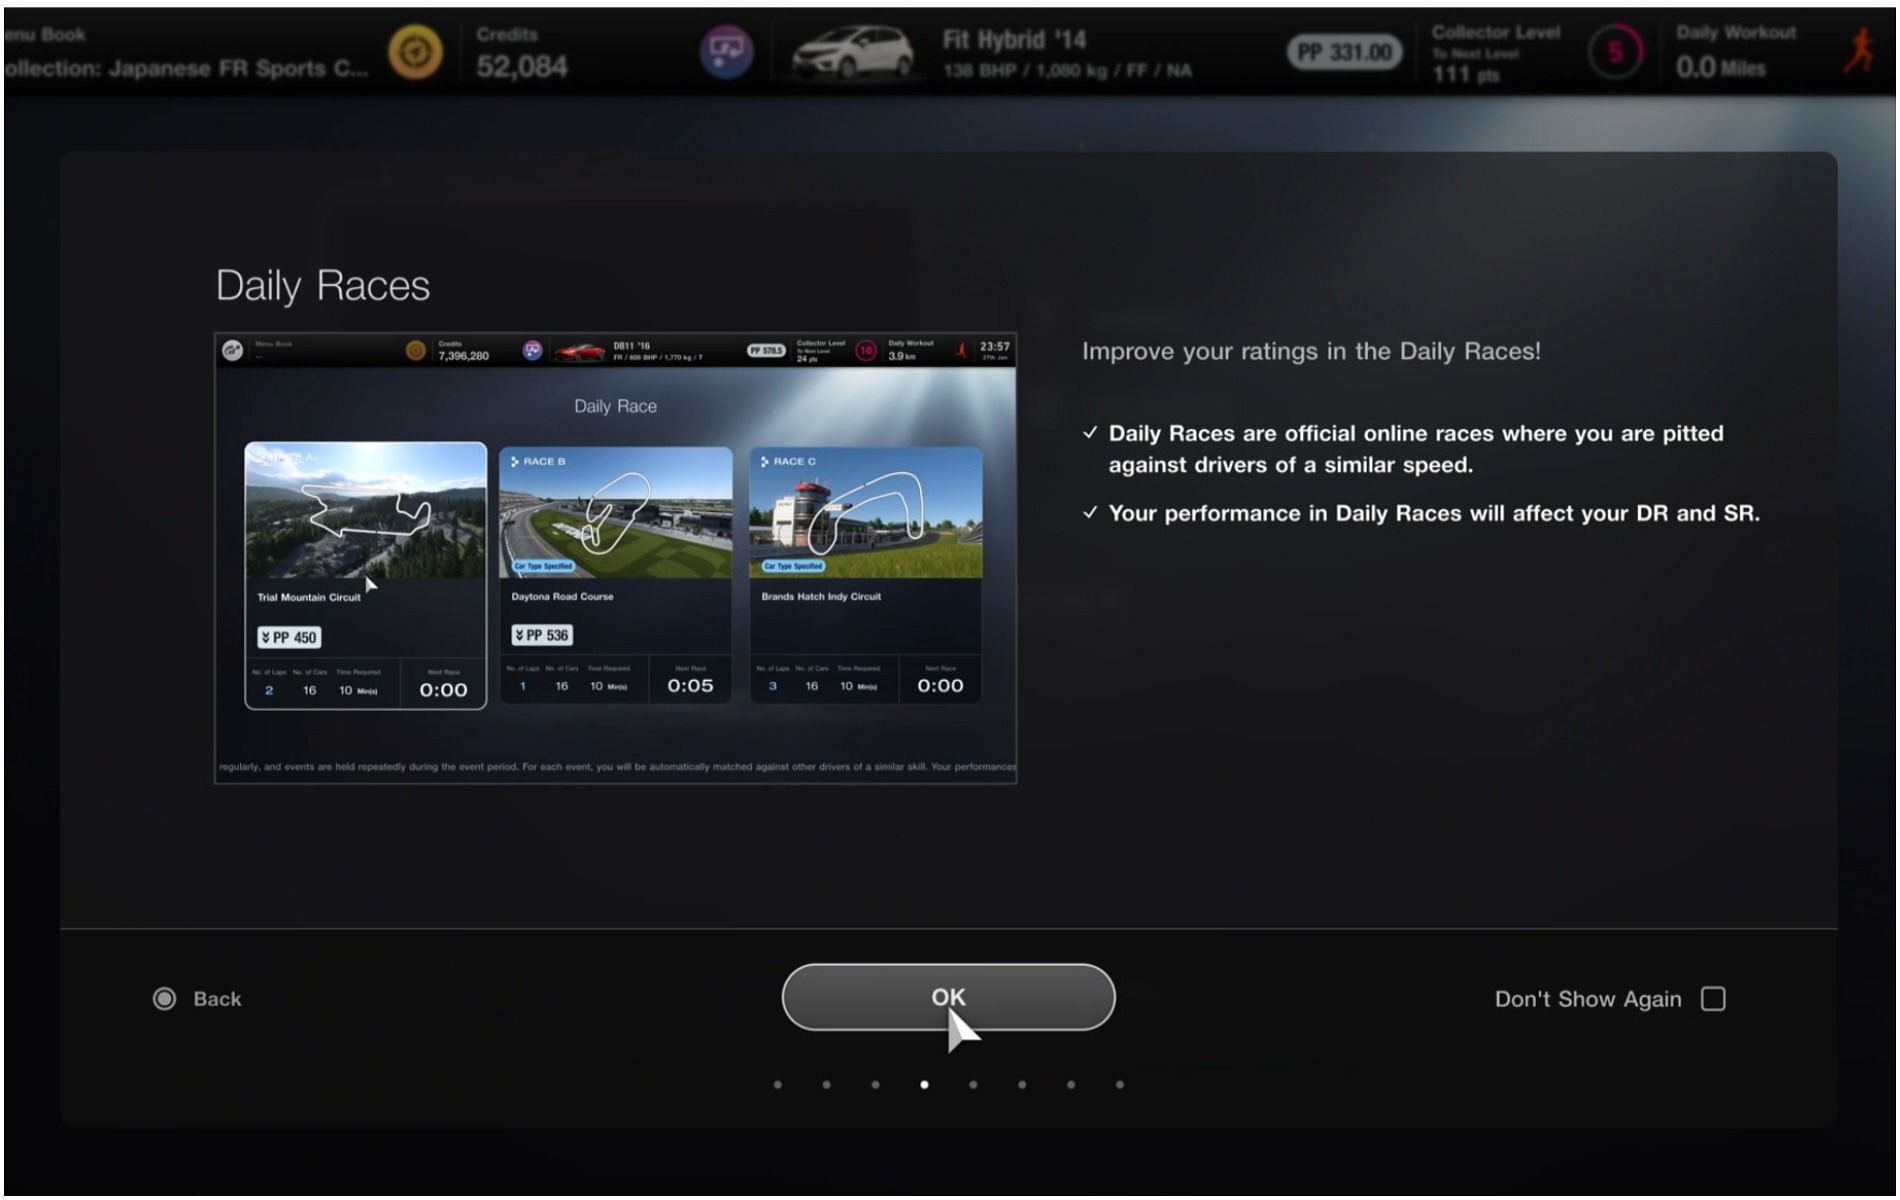 How to access online multiplayer in Gran Turismo 7